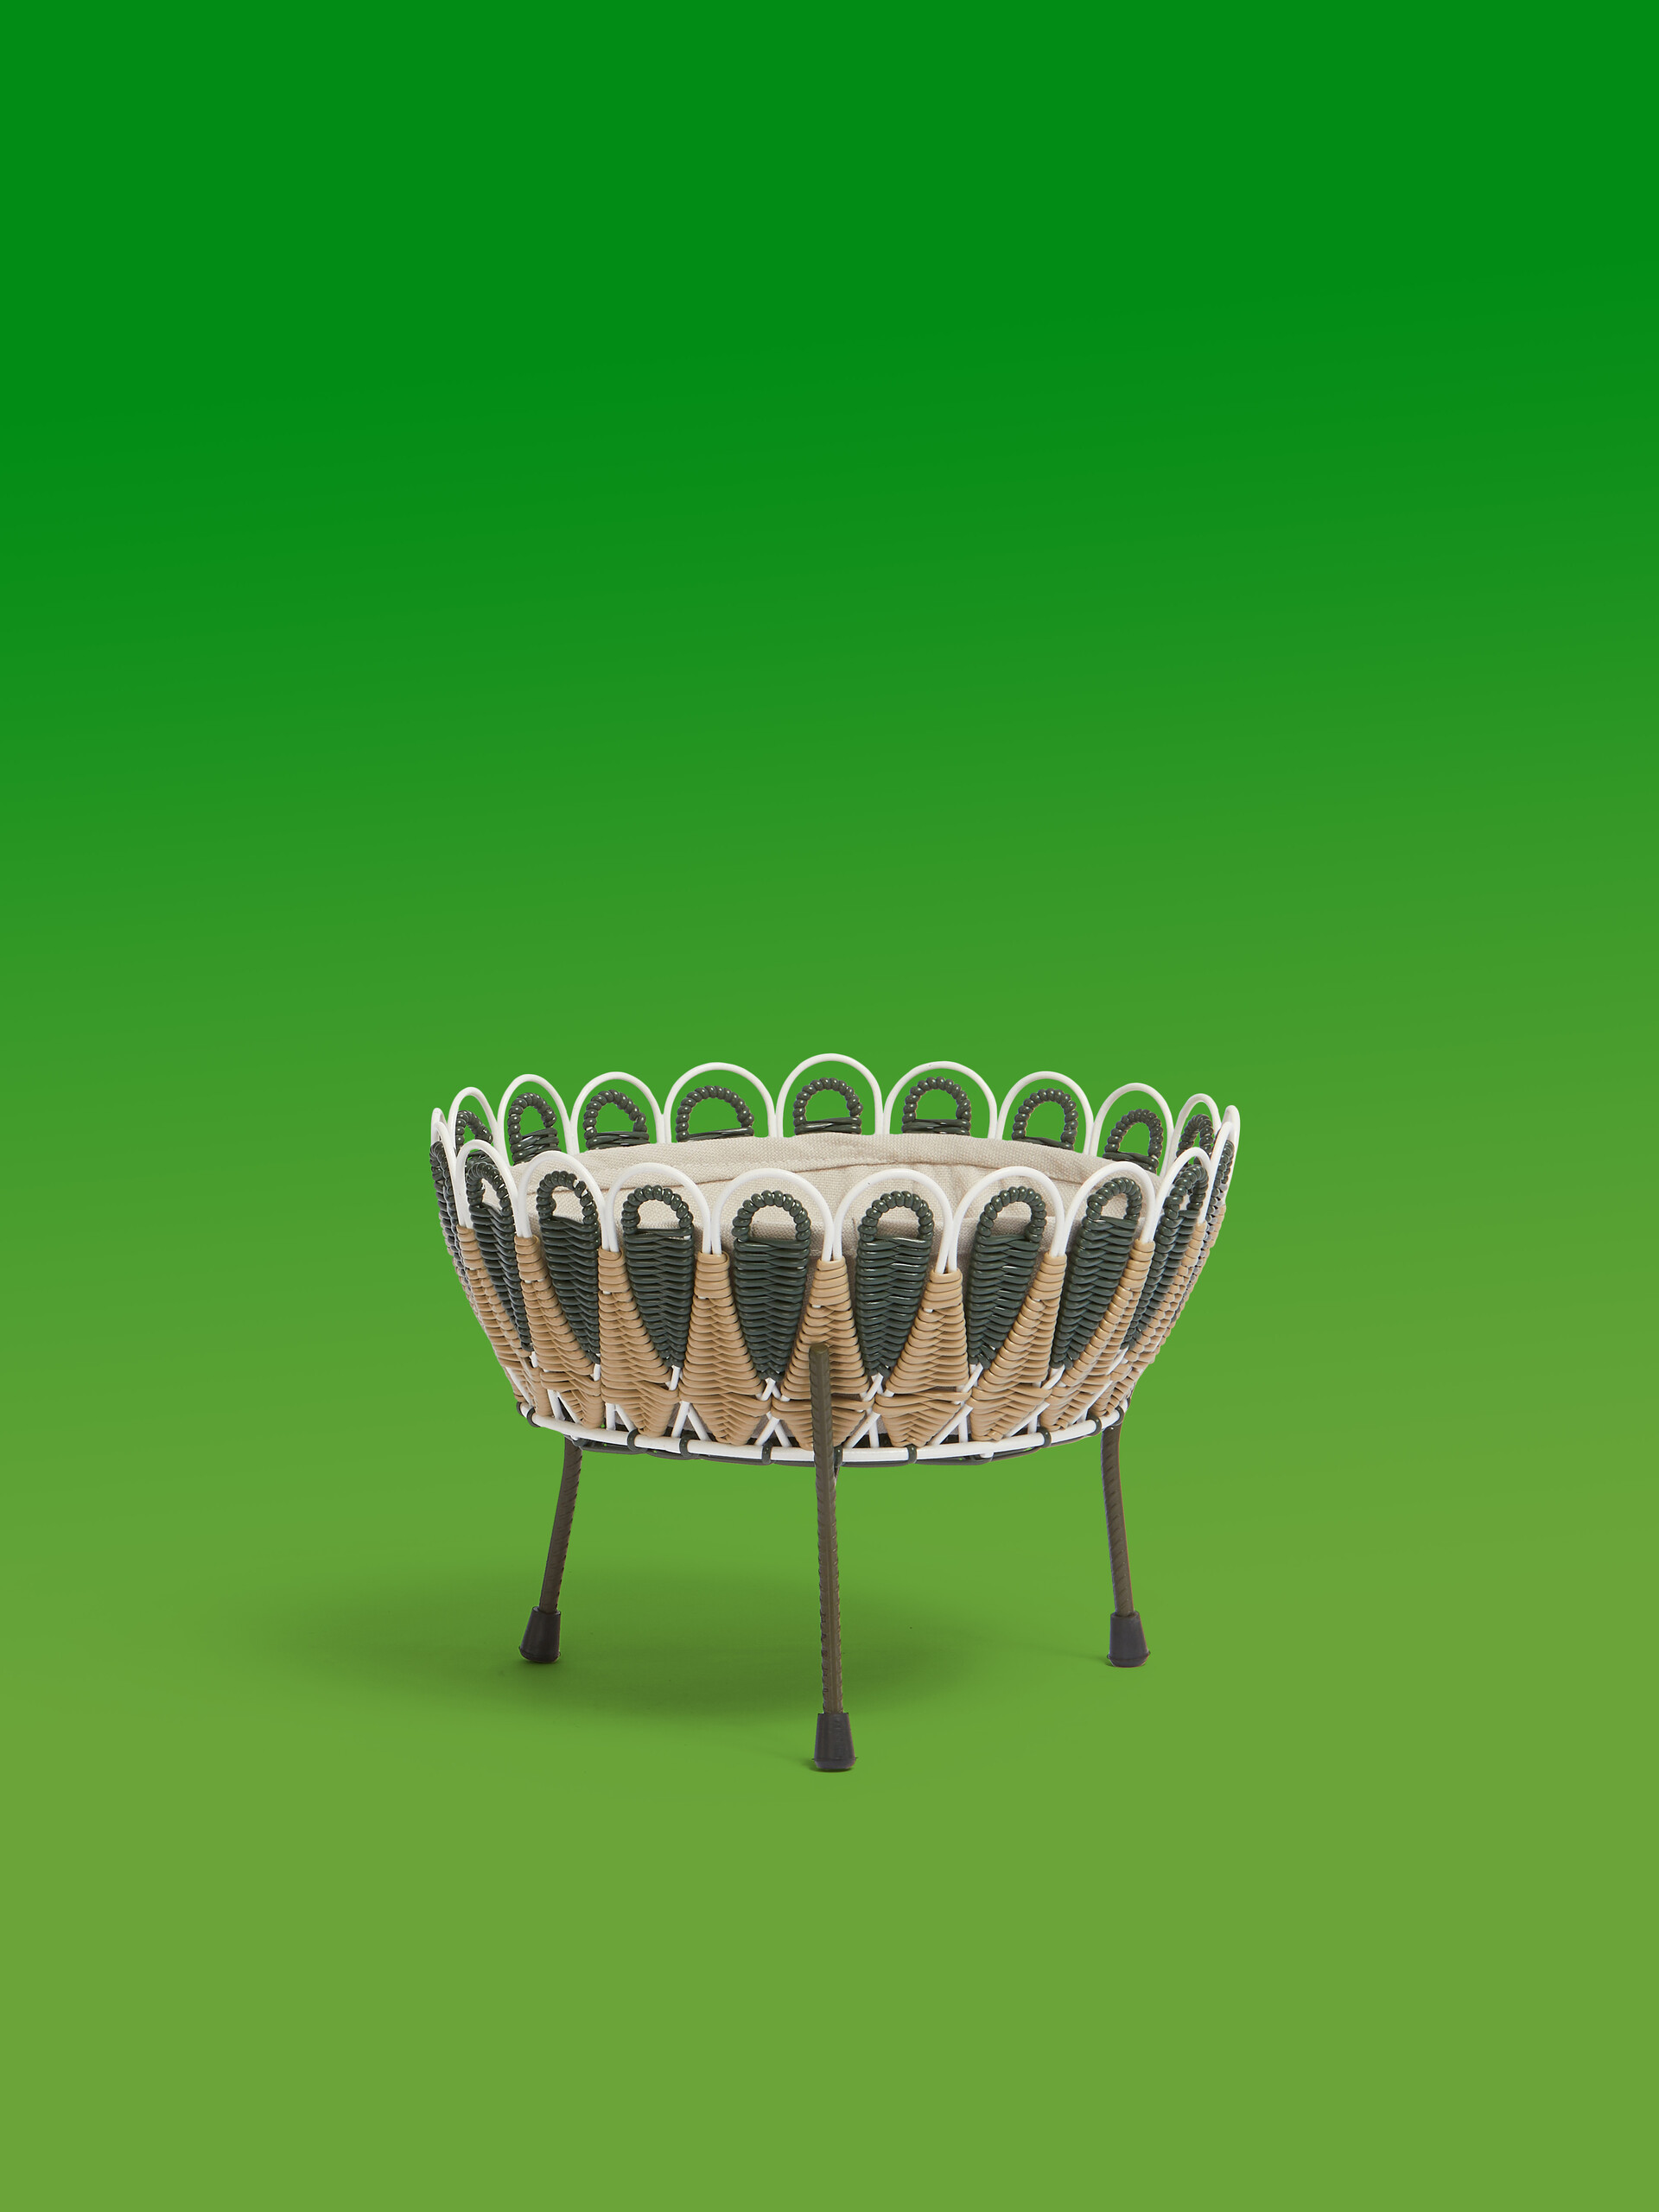 Green And Beige Marni Market Scalloped Bread Basket - Accessories - Image 1